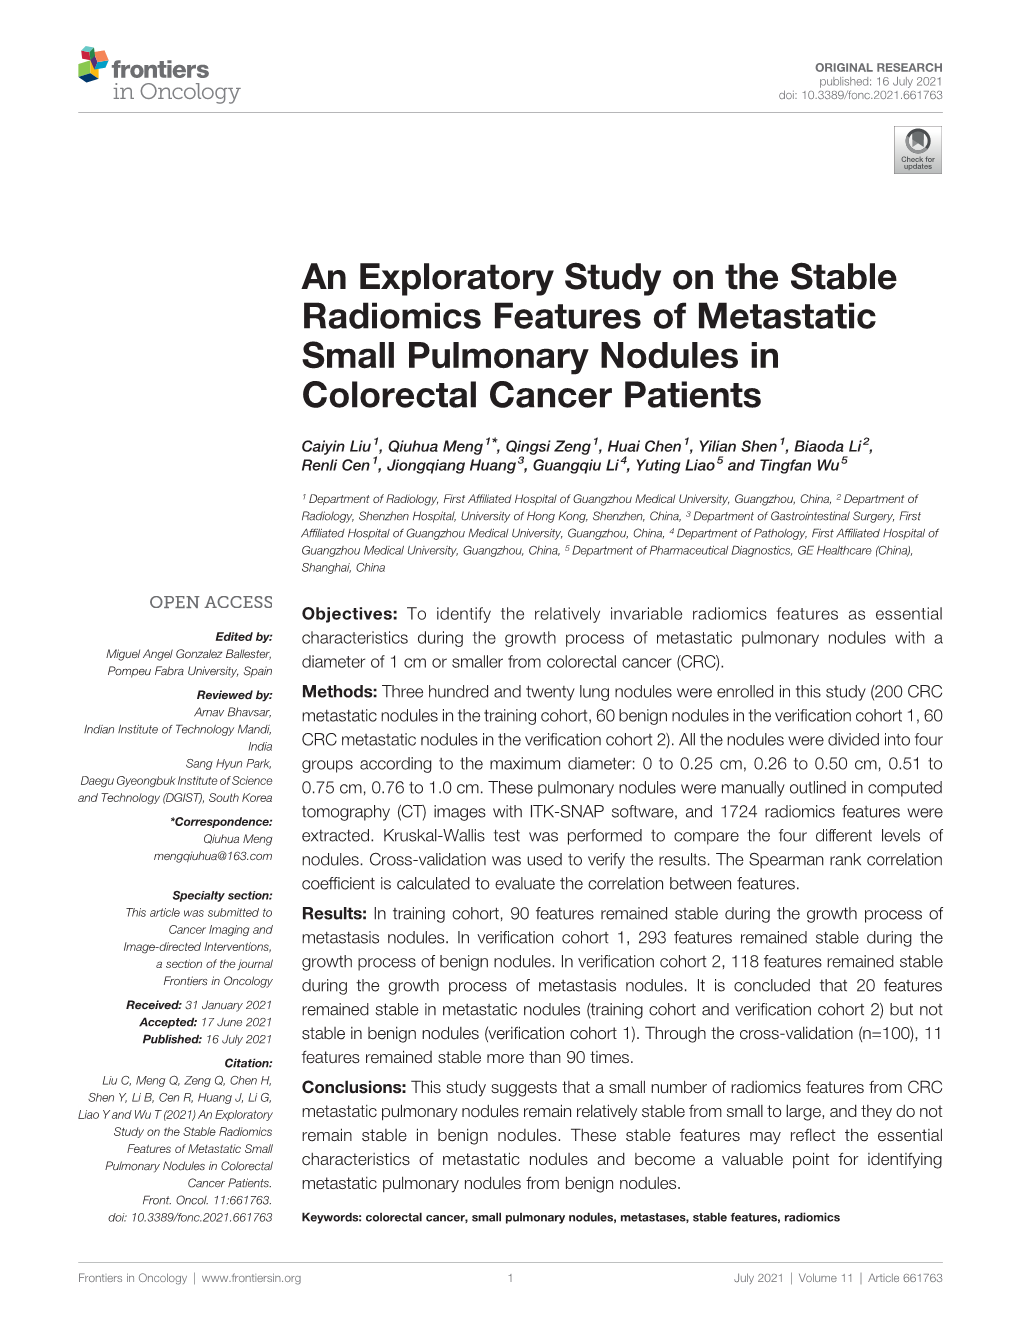 An Exploratory Study on the Stable Radiomics Features of Metastatic Small Pulmonary Nodules in Colorectal Cancer Patients